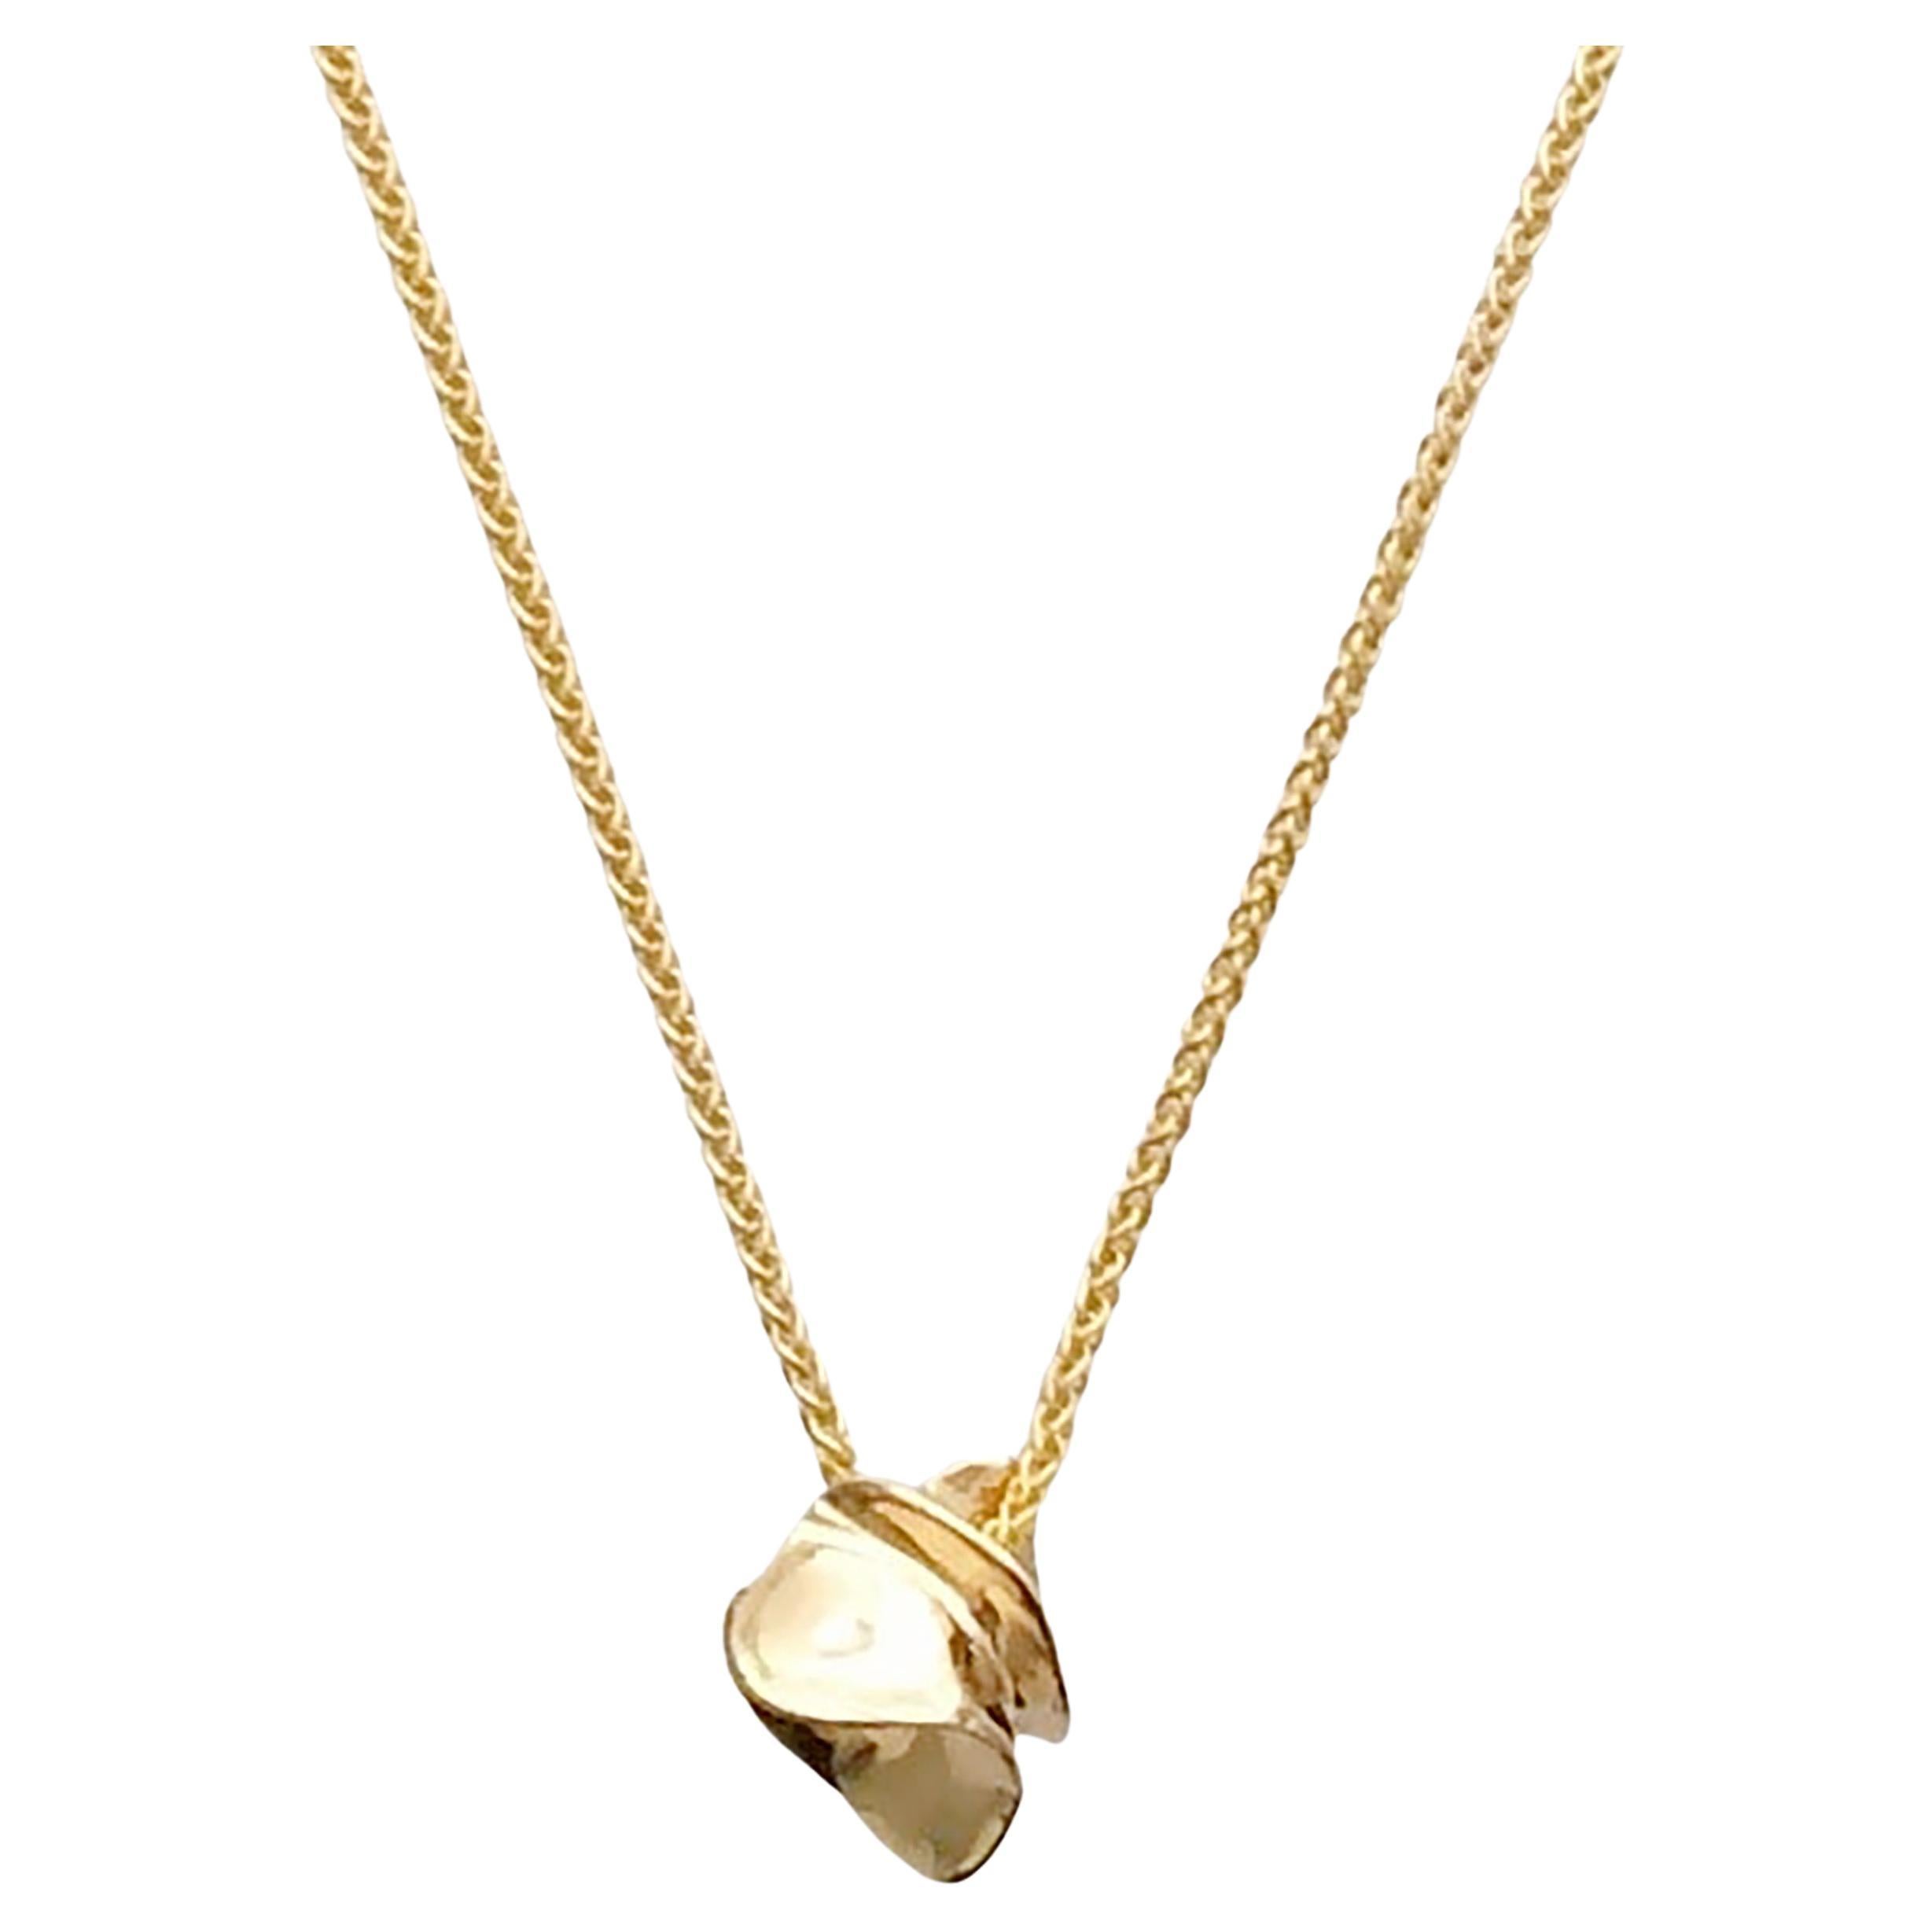 Sculptural Form Contemporary Necklace 14K Gold with Wheat Chain For Sale